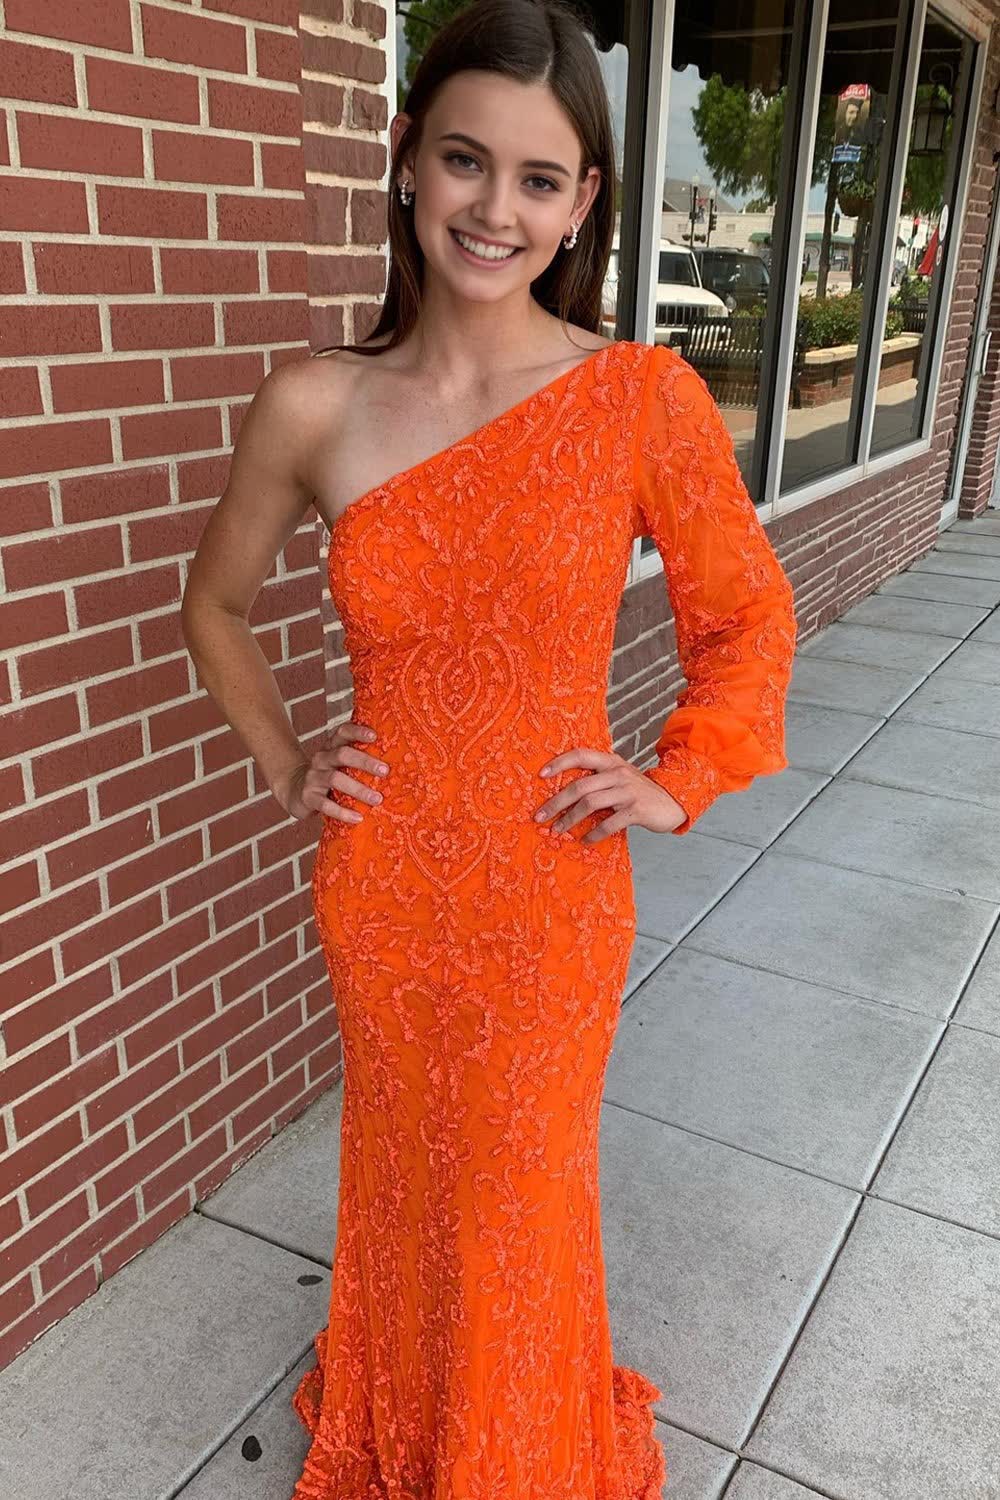 Sparkly Orange Sequins One Shoulder One Sleeve Long Corset Prom Dress outfits, Sparkly Orange Sequins One Shoulder One Sleeve Long Prom Dress